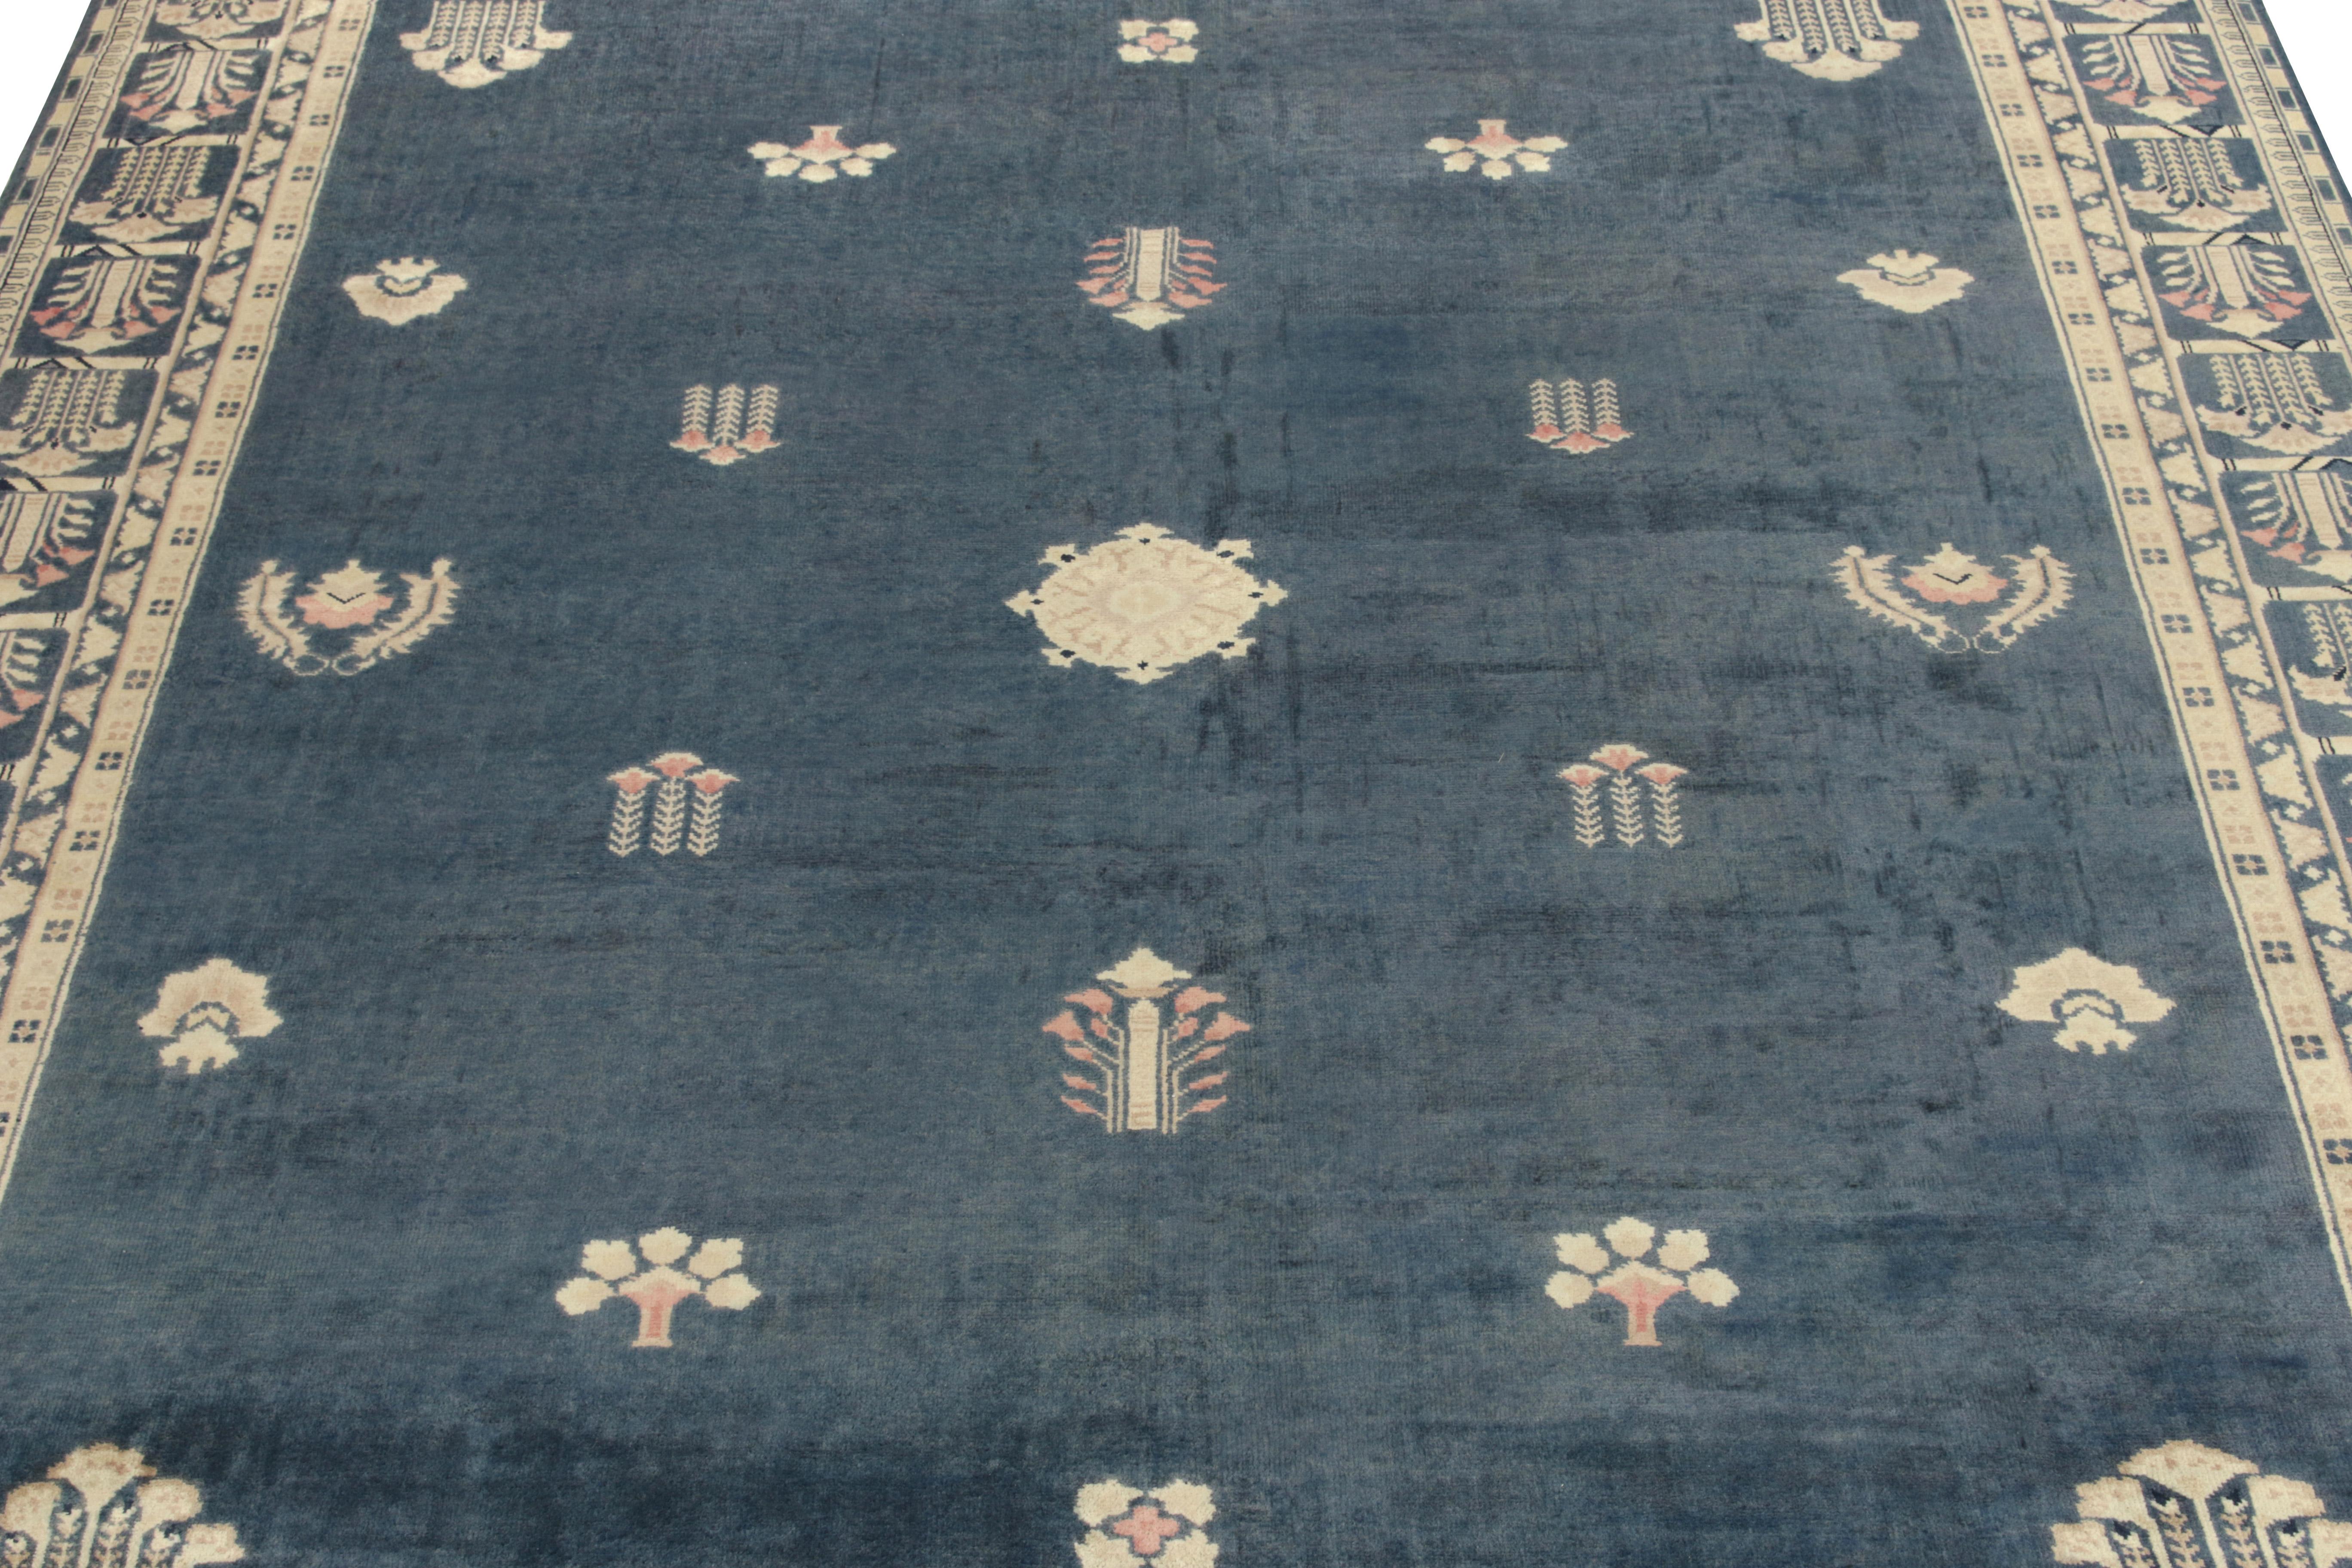 Indian Vintage Chinese Deco Style Rug in Blue Beige-Brown Floral Pattern by Rug & Kilim For Sale